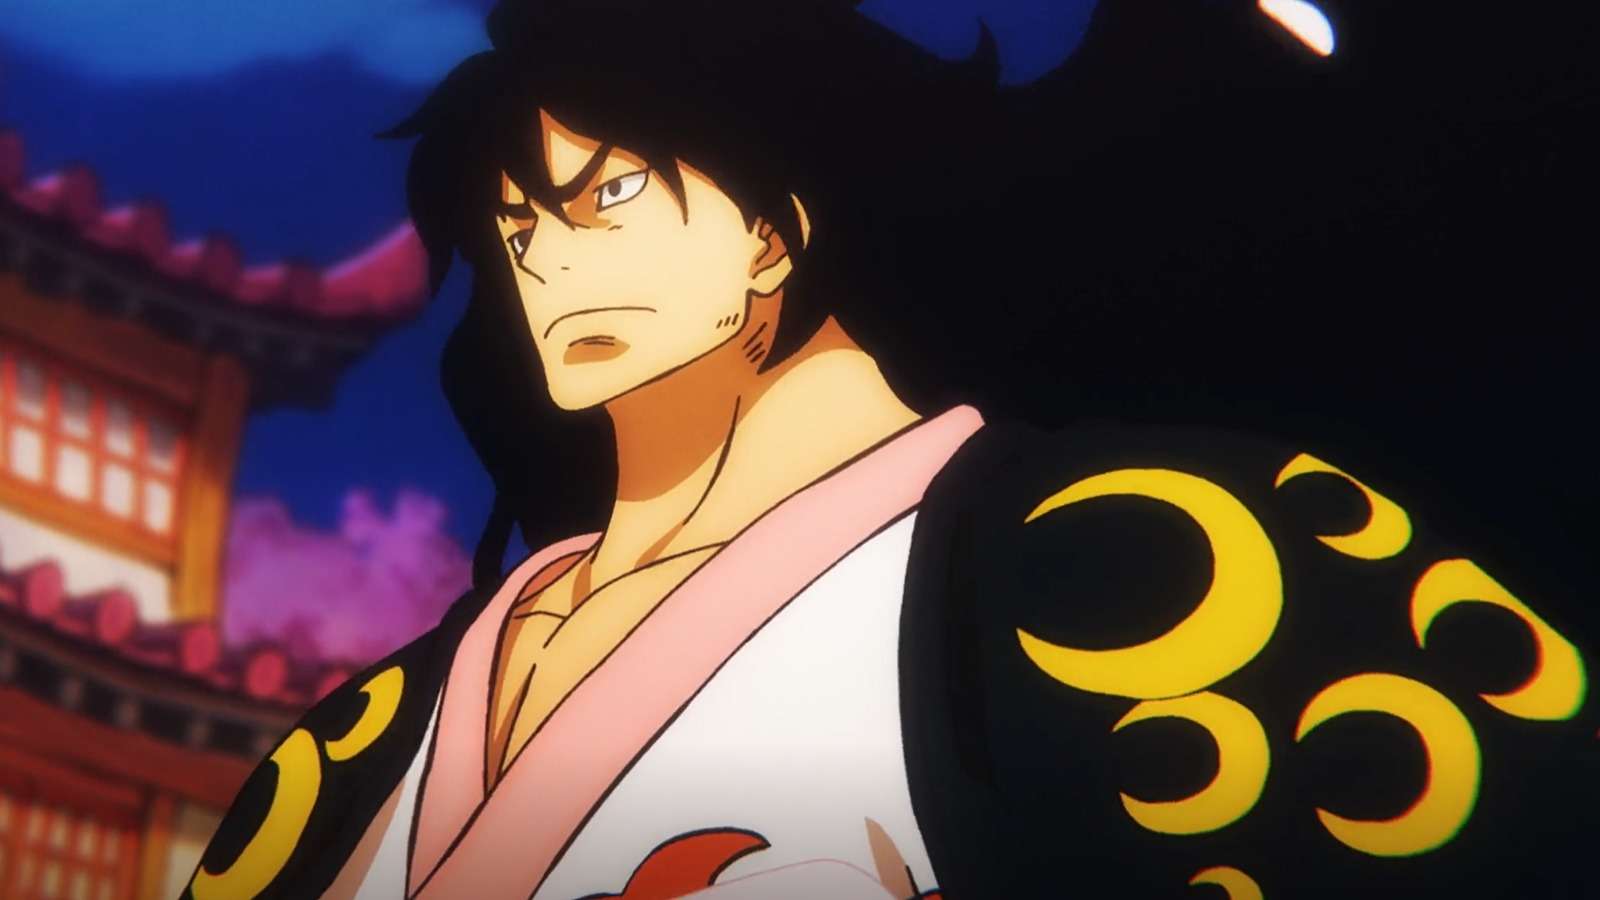 An image of adult Momonosuke from One Piece